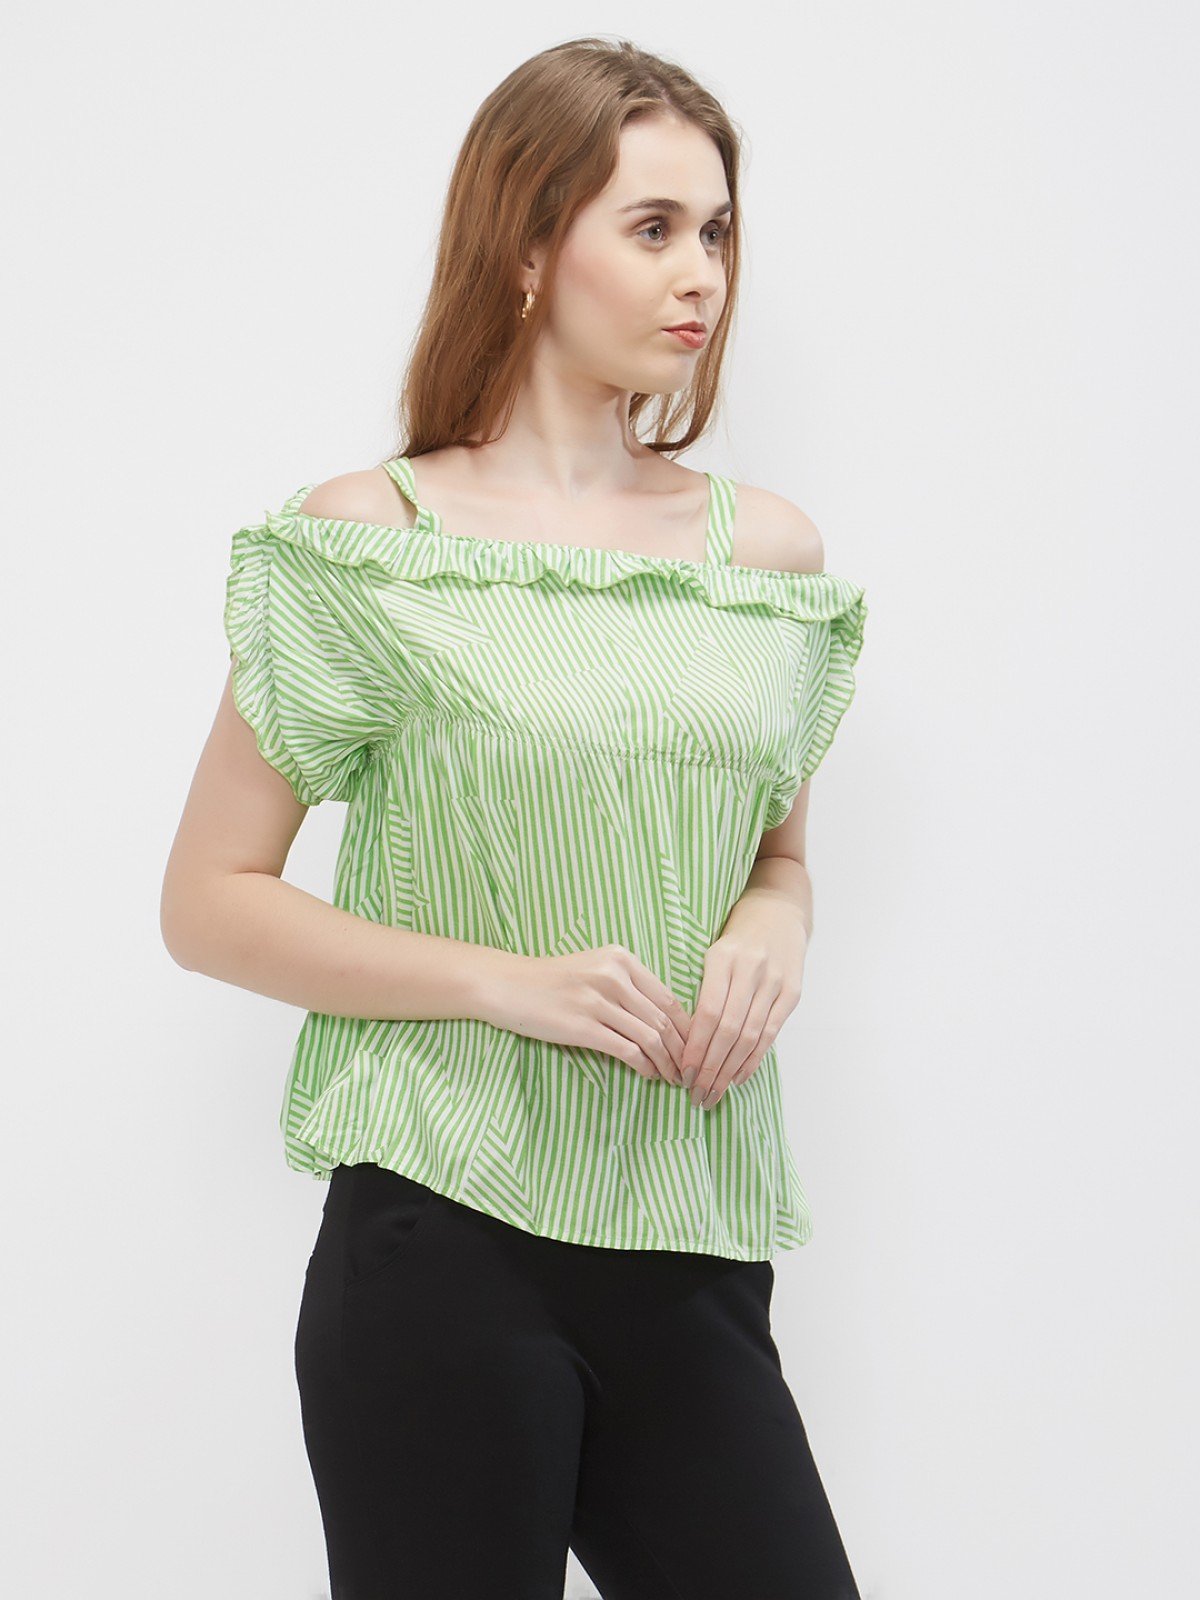 Elegore White Light Green Strappy Stripped Off Shoulder Top